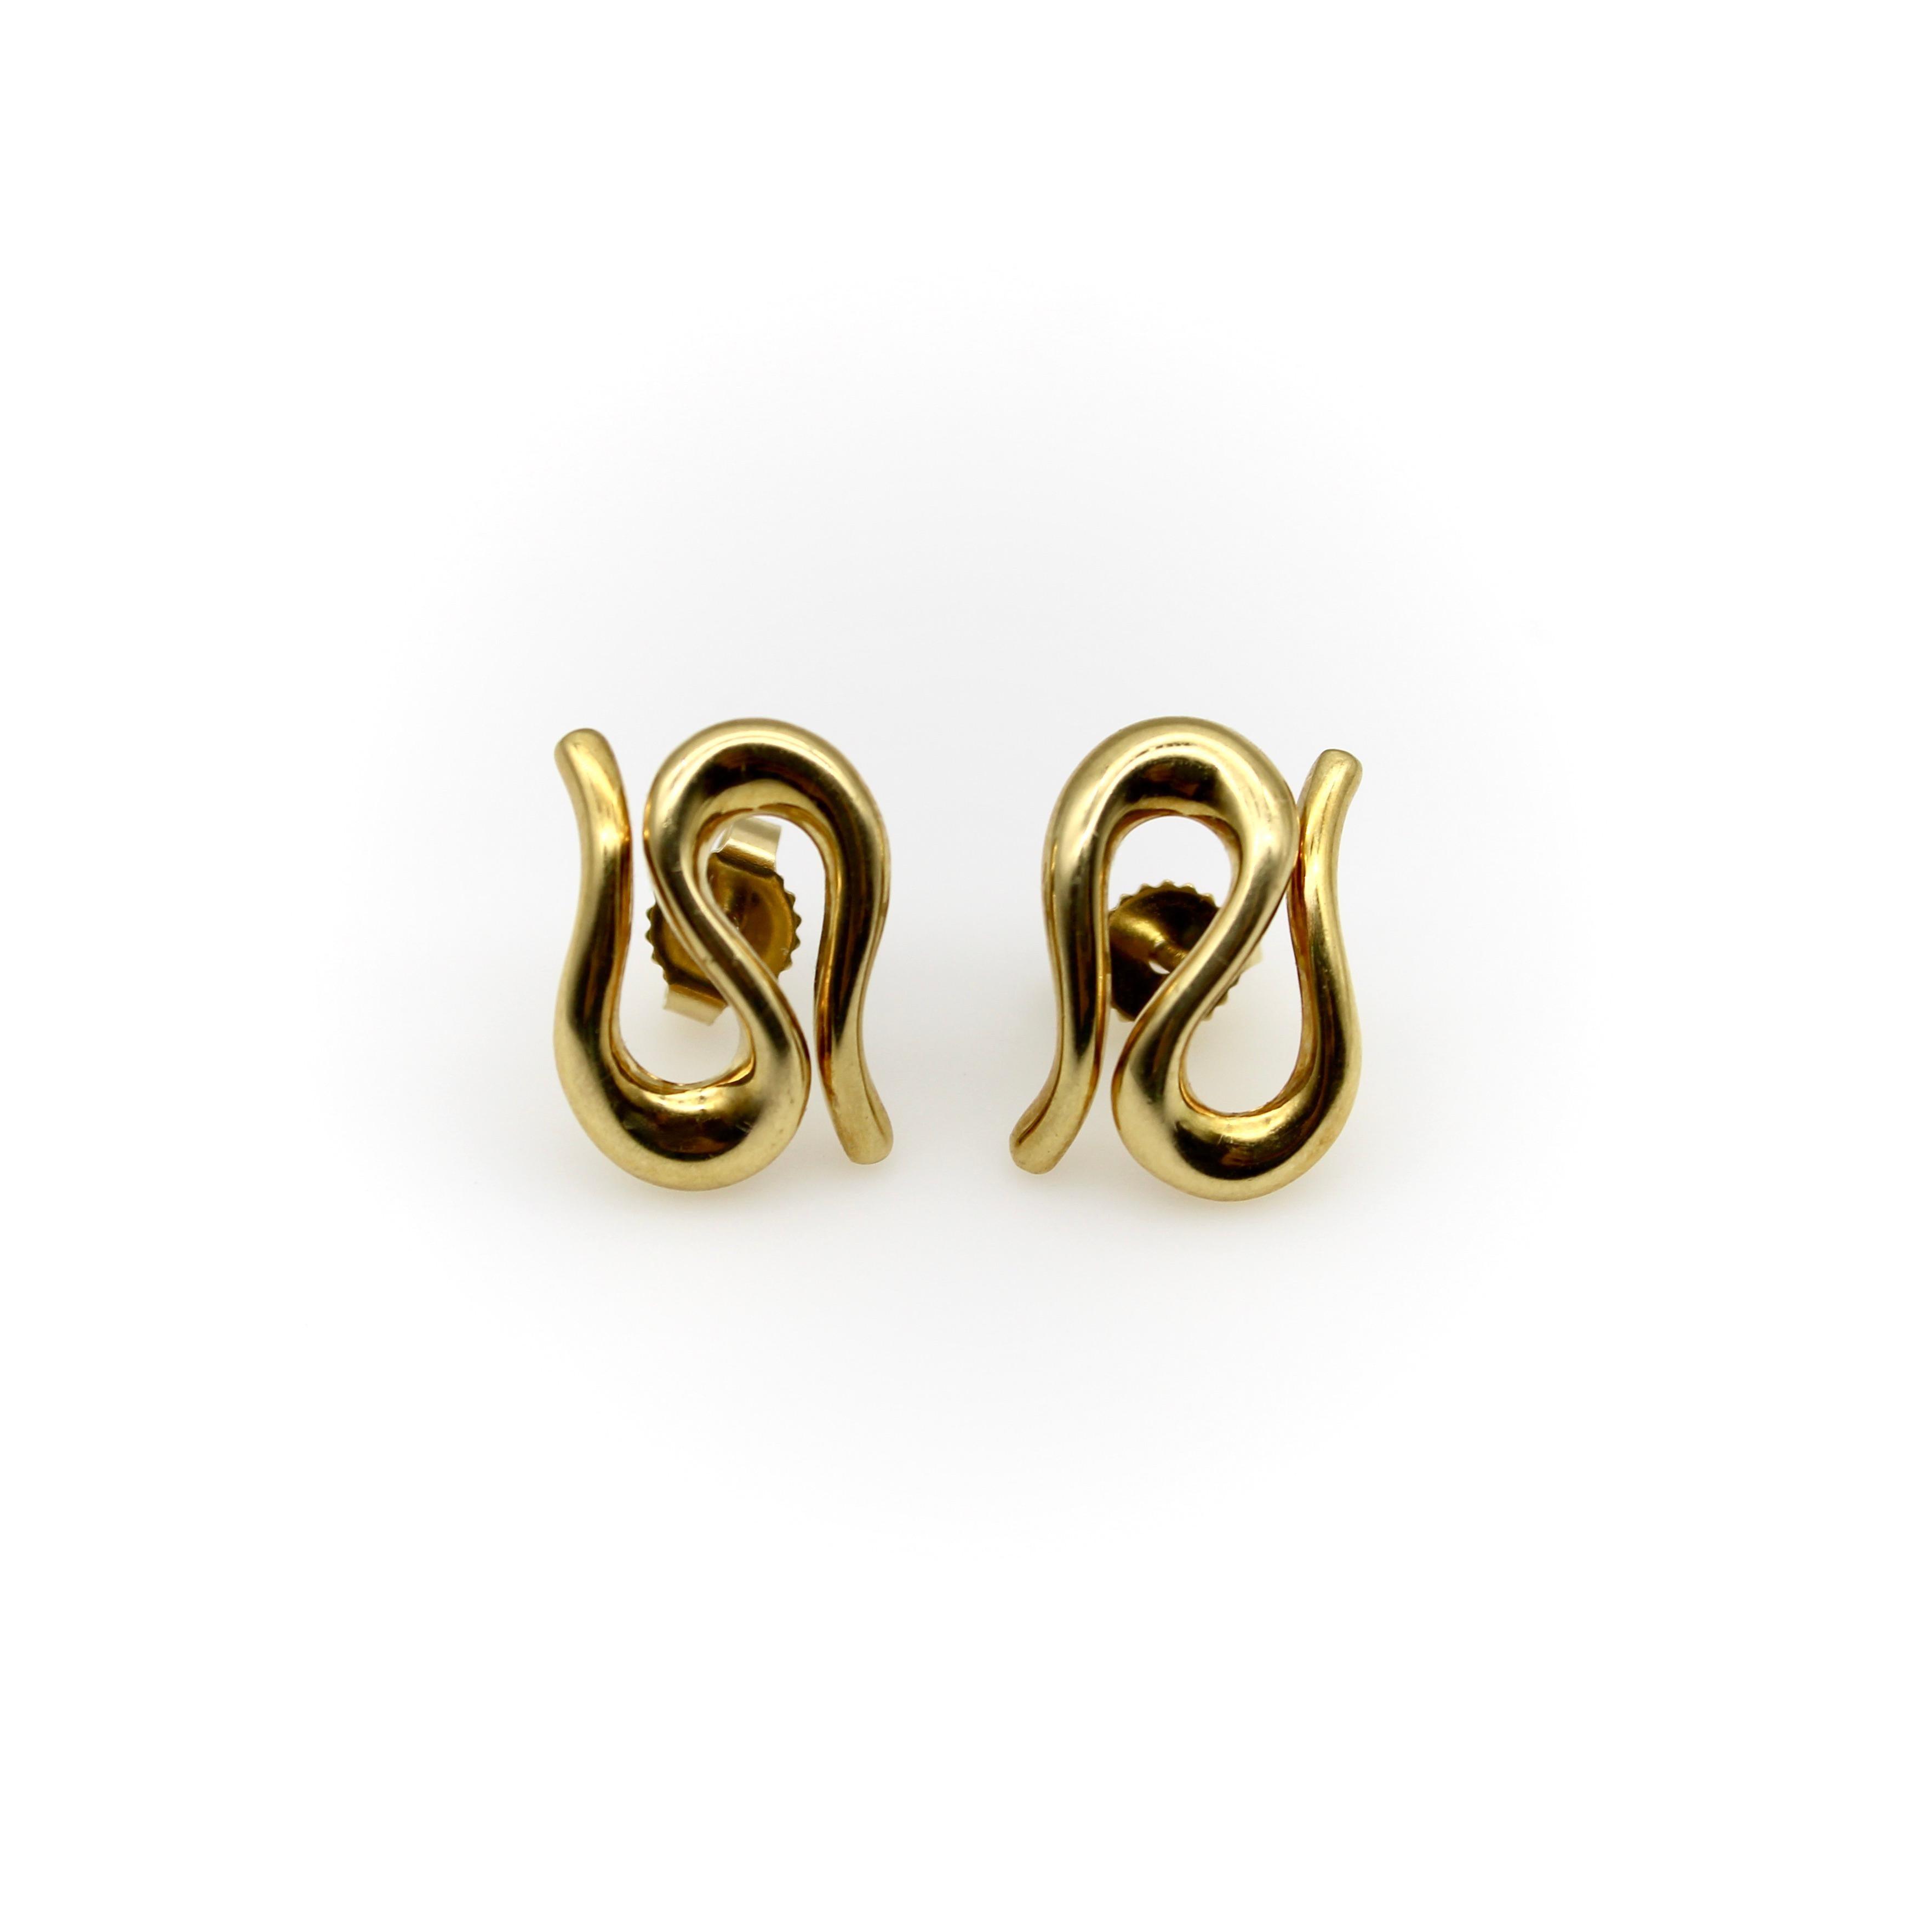 These stunning 18k gold earrings are a rare Tiffany & Co. Elsa Peretti design, circa the 1980’s. Their sinuous form folds back on itself in an elegant curve—the body of a snake without a head or tail. Like many of Elsa Peretti’s designs, they are a